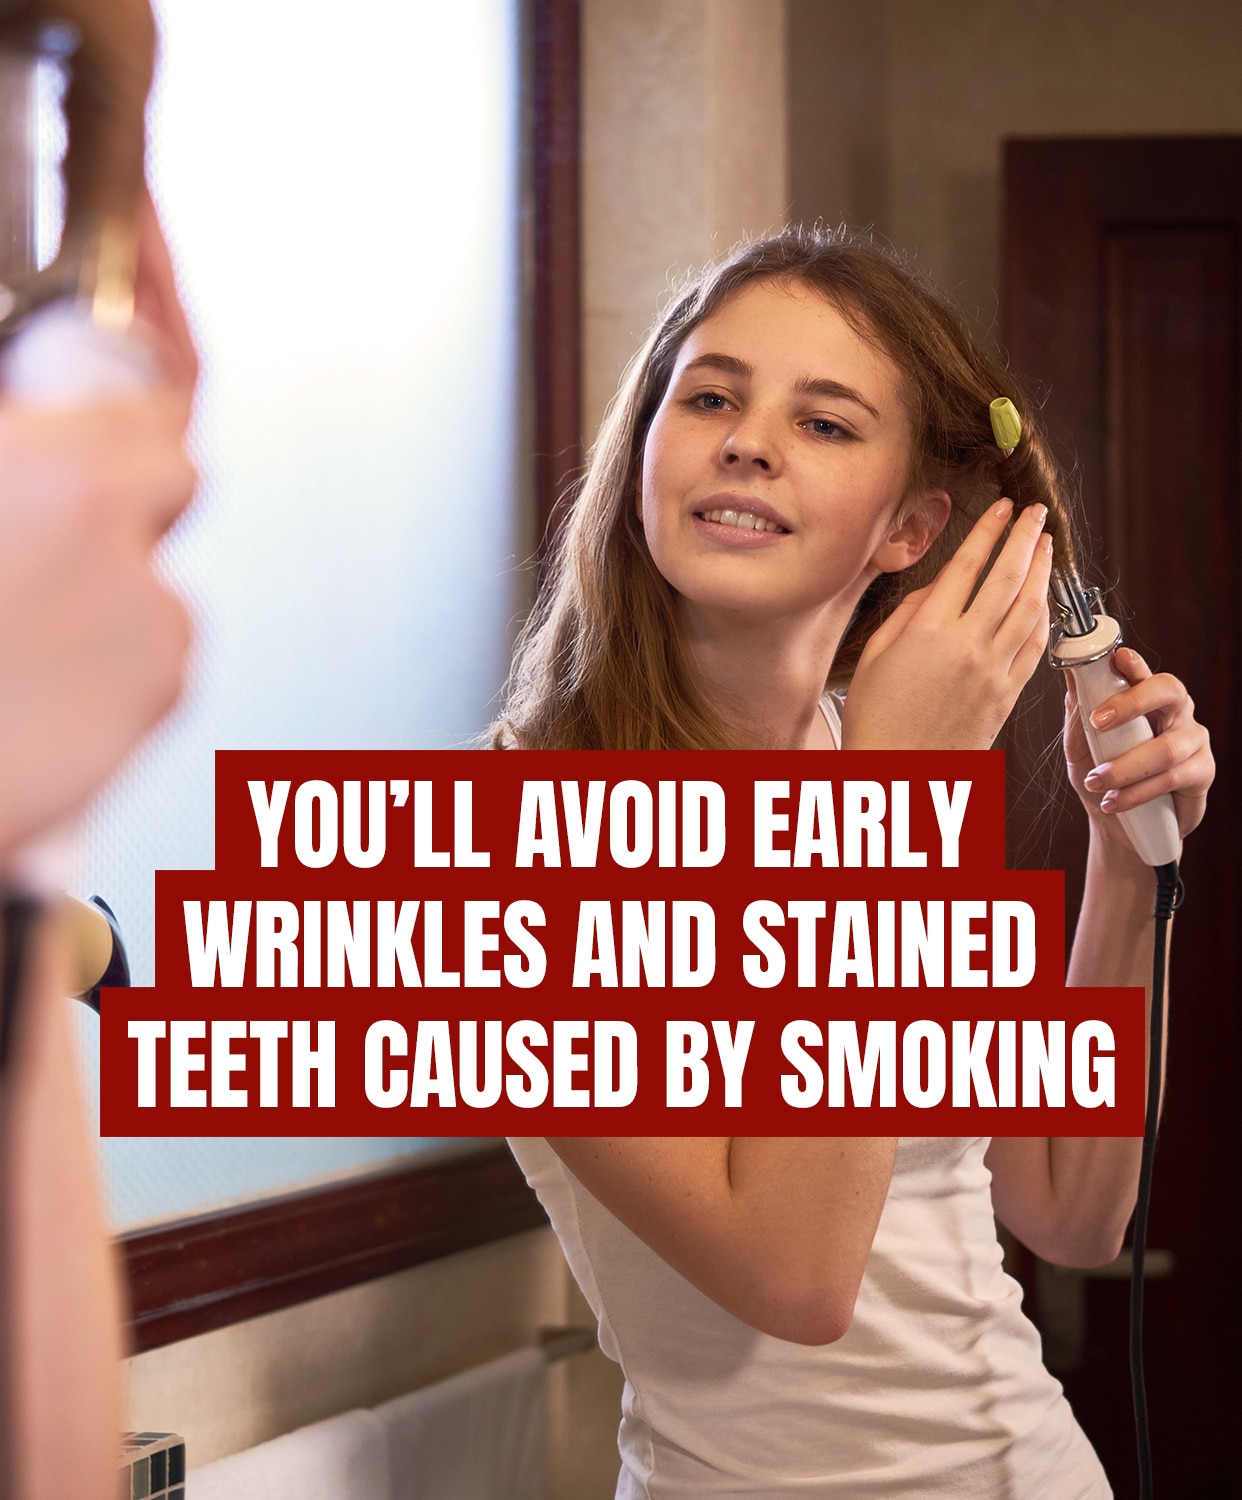 You'll avoid early wrinkles and stained teeth caused by smoking